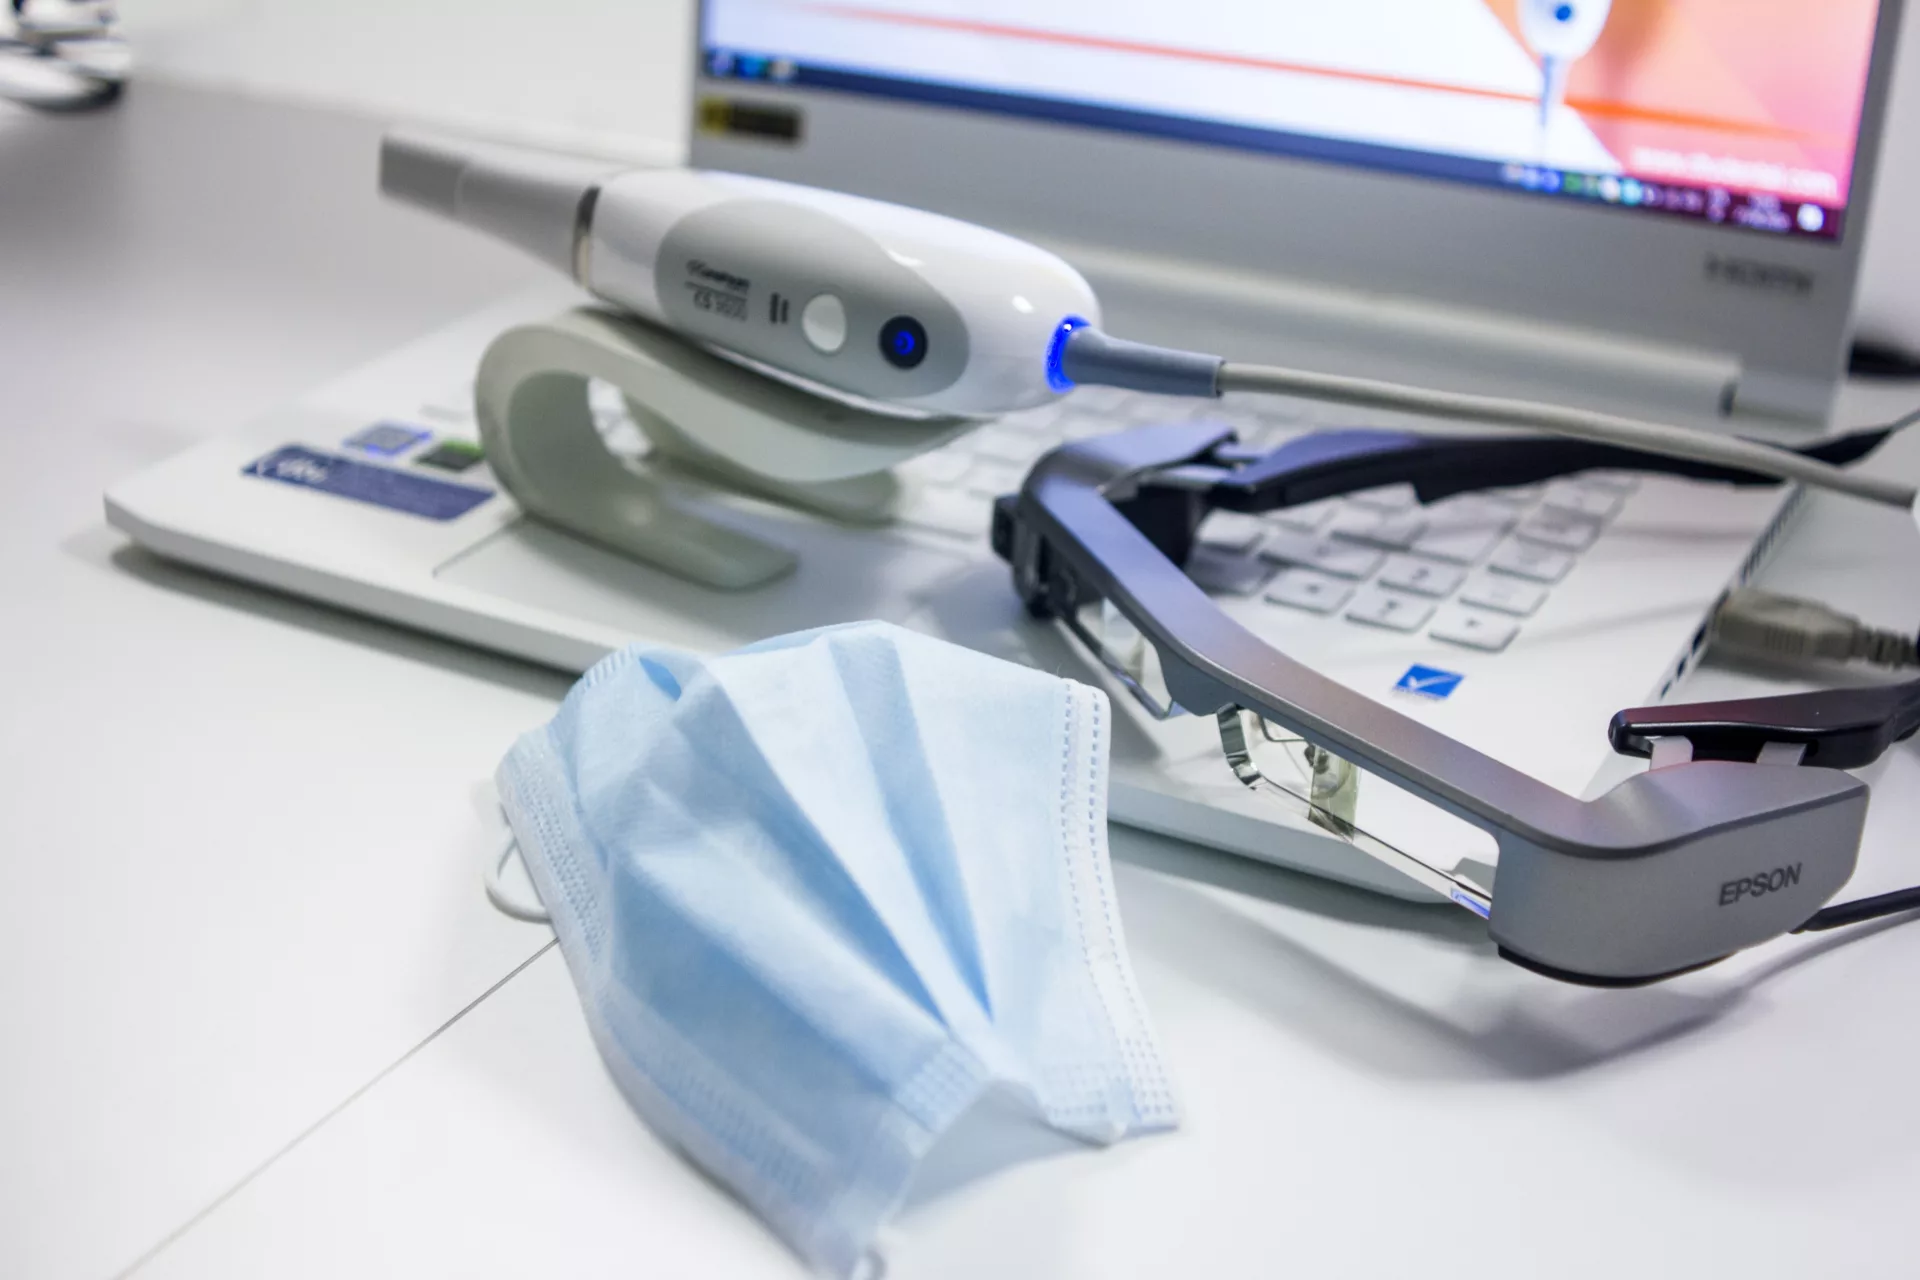 dental tools sitting on top of an opened laptop